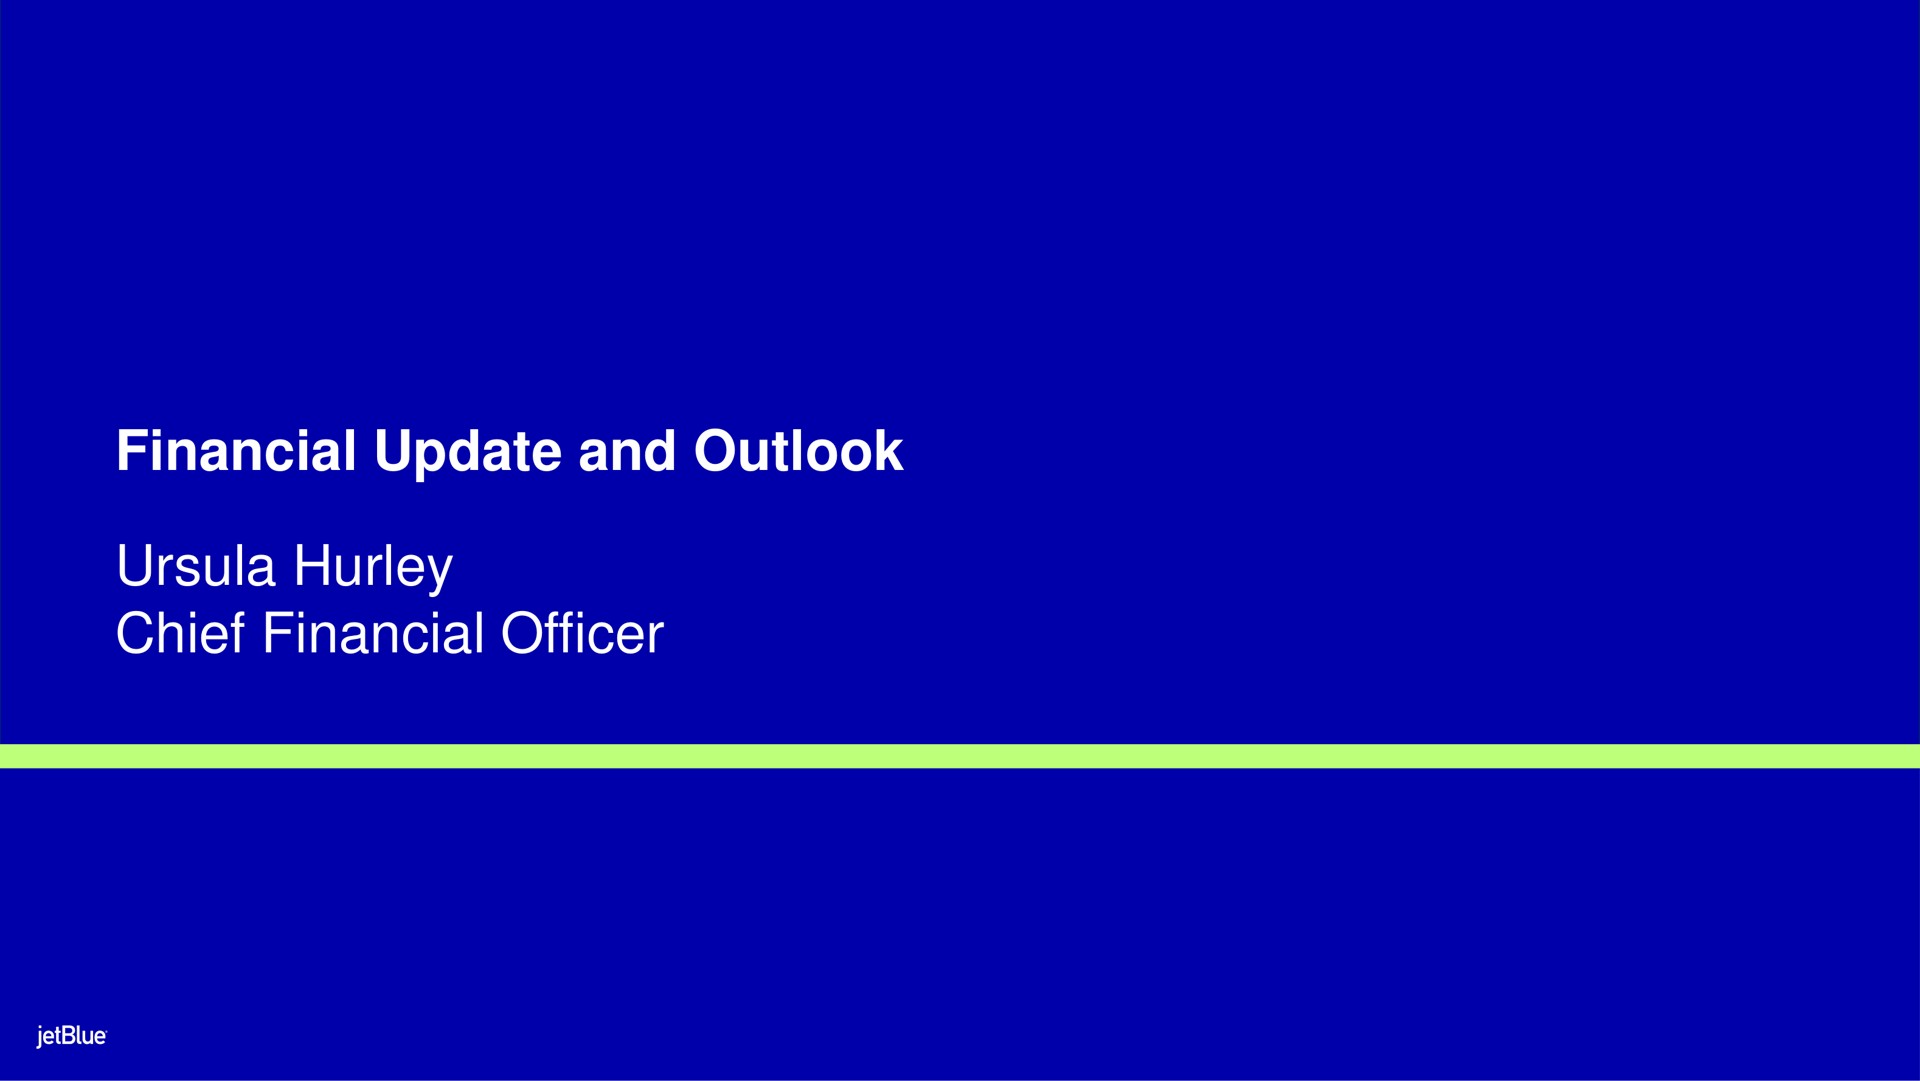 financial update and outlook hurley chief financial officer | jetBlue